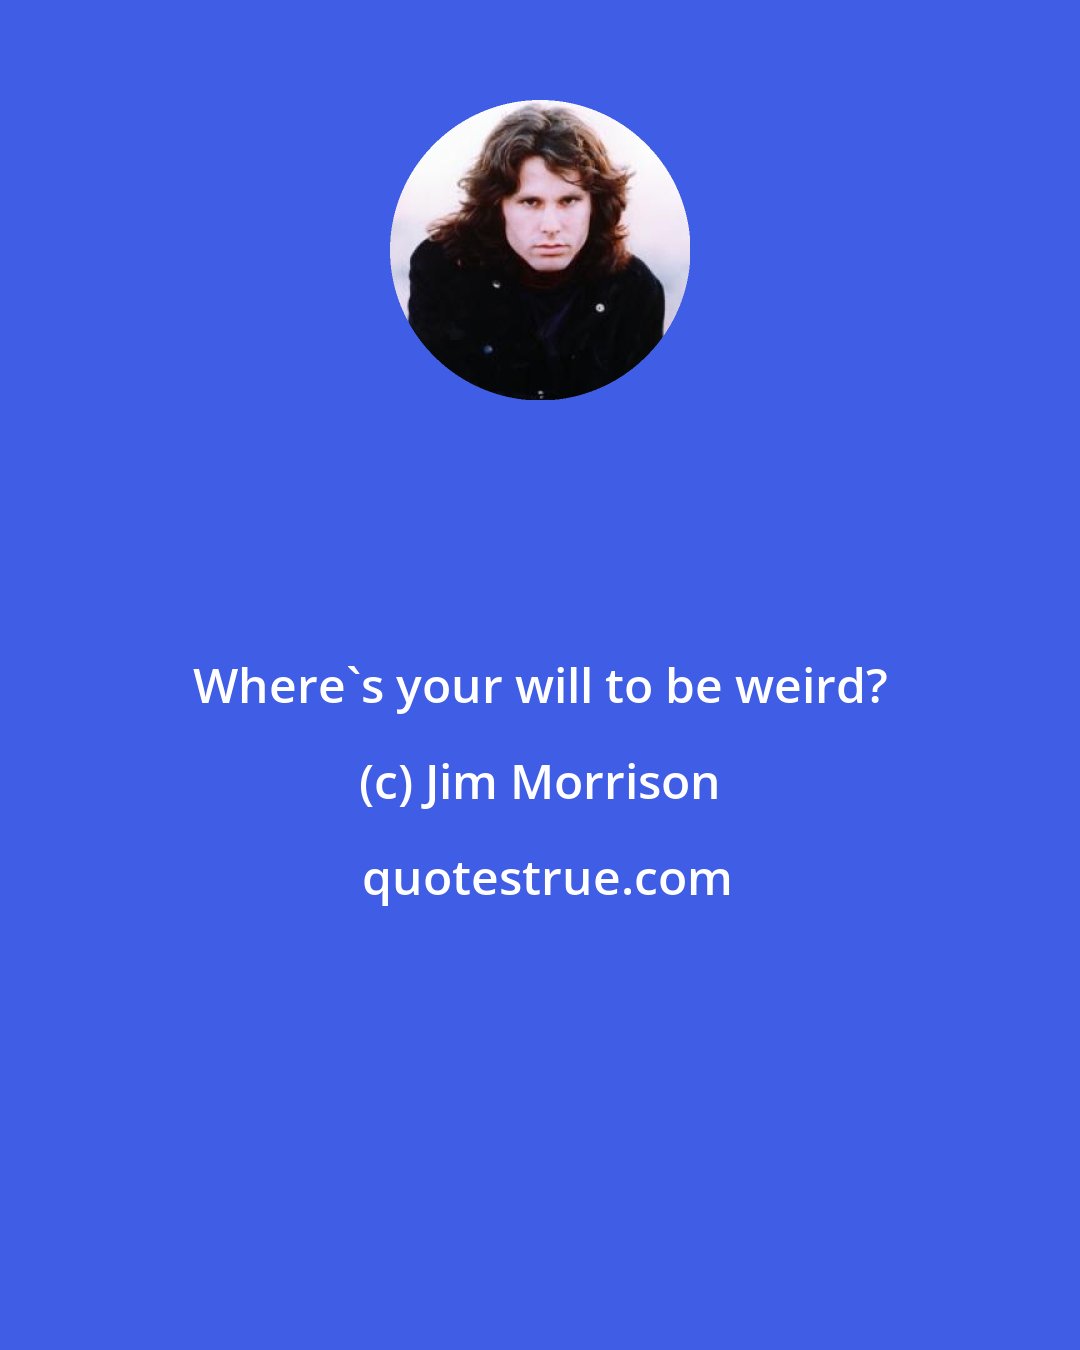 Jim Morrison: Where's your will to be weird?